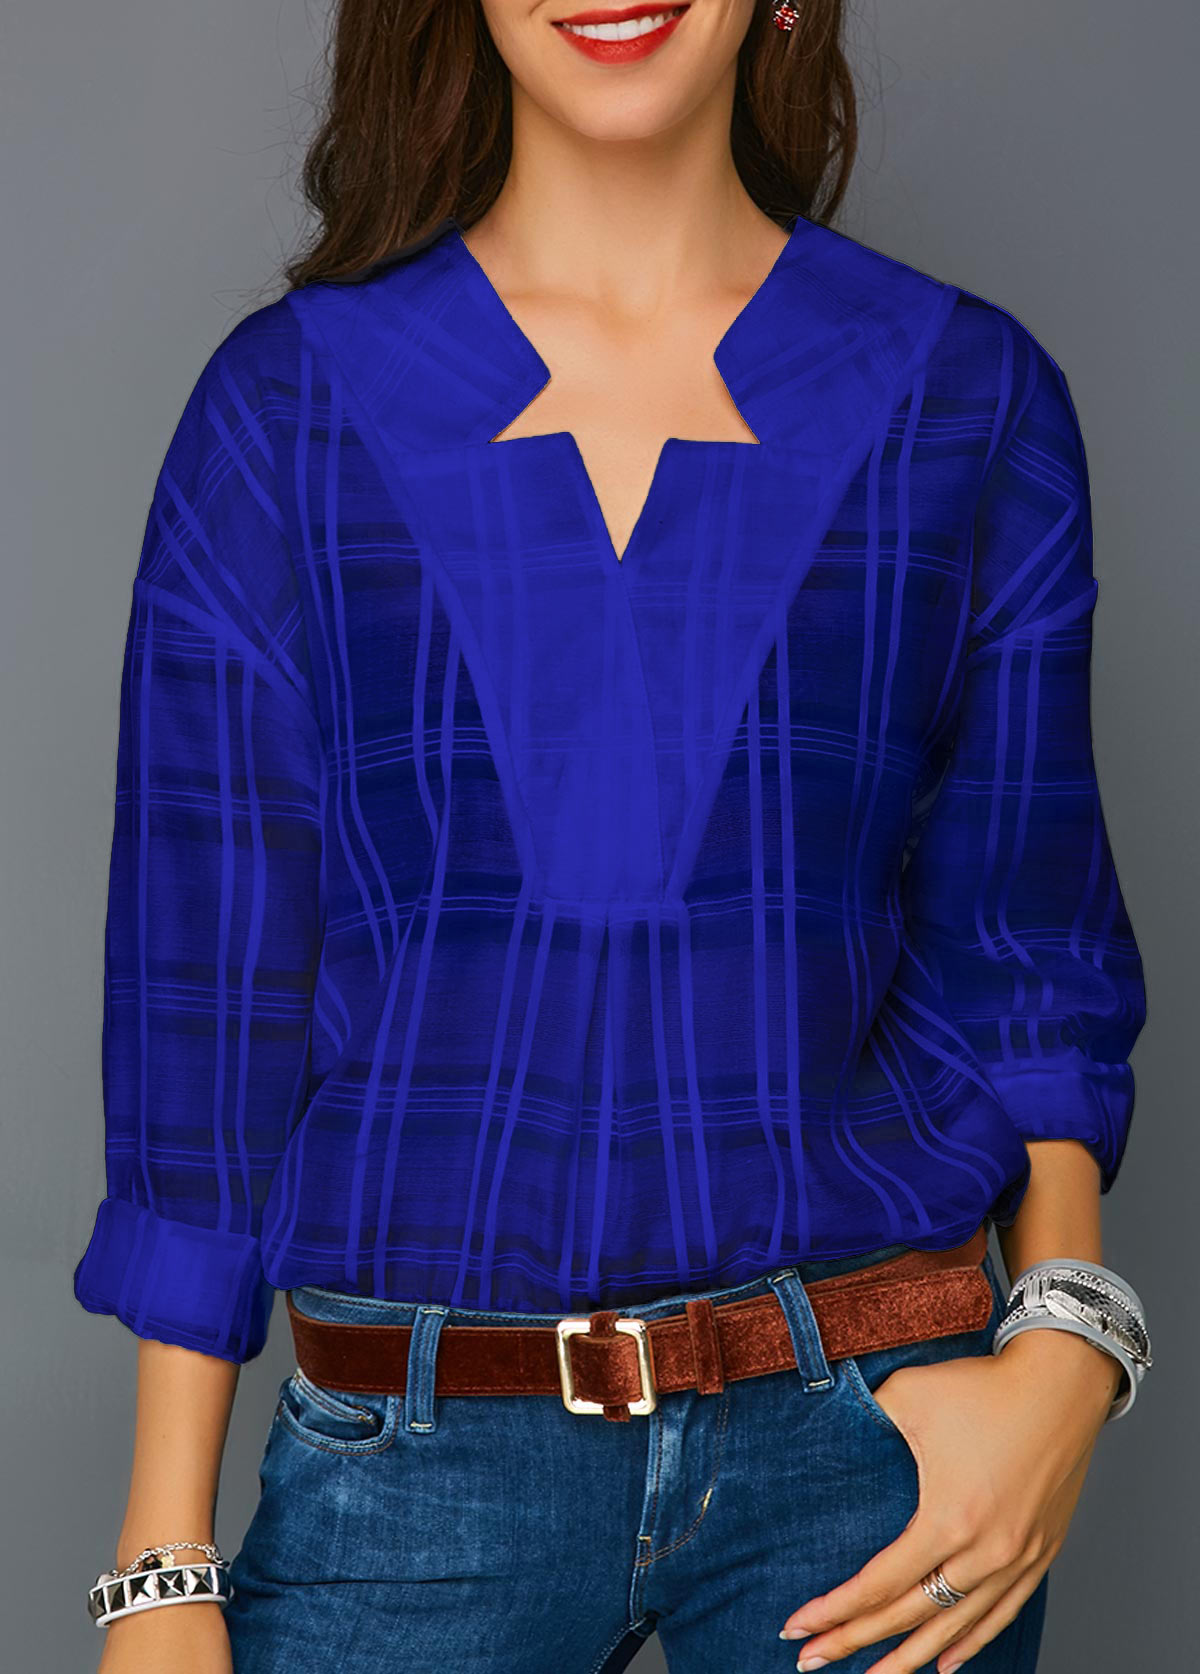 Blue blouse – strong colors and great cuts